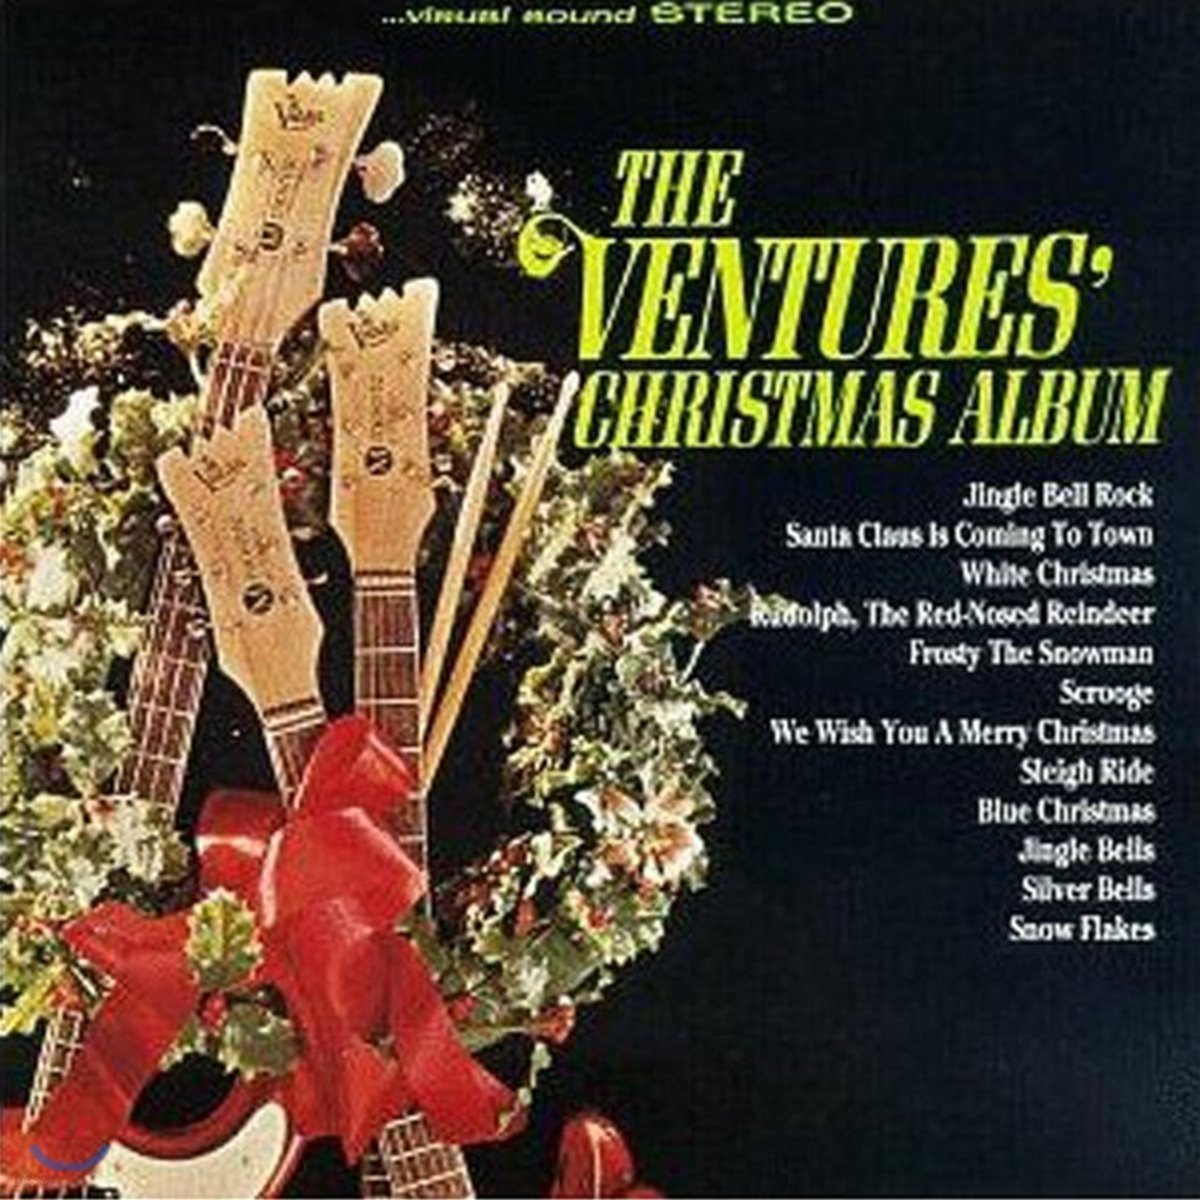 The Ventures (벤처스) - The Ventures' Christmas Album (Deluxe Expanded Mono & Stereo Edition)